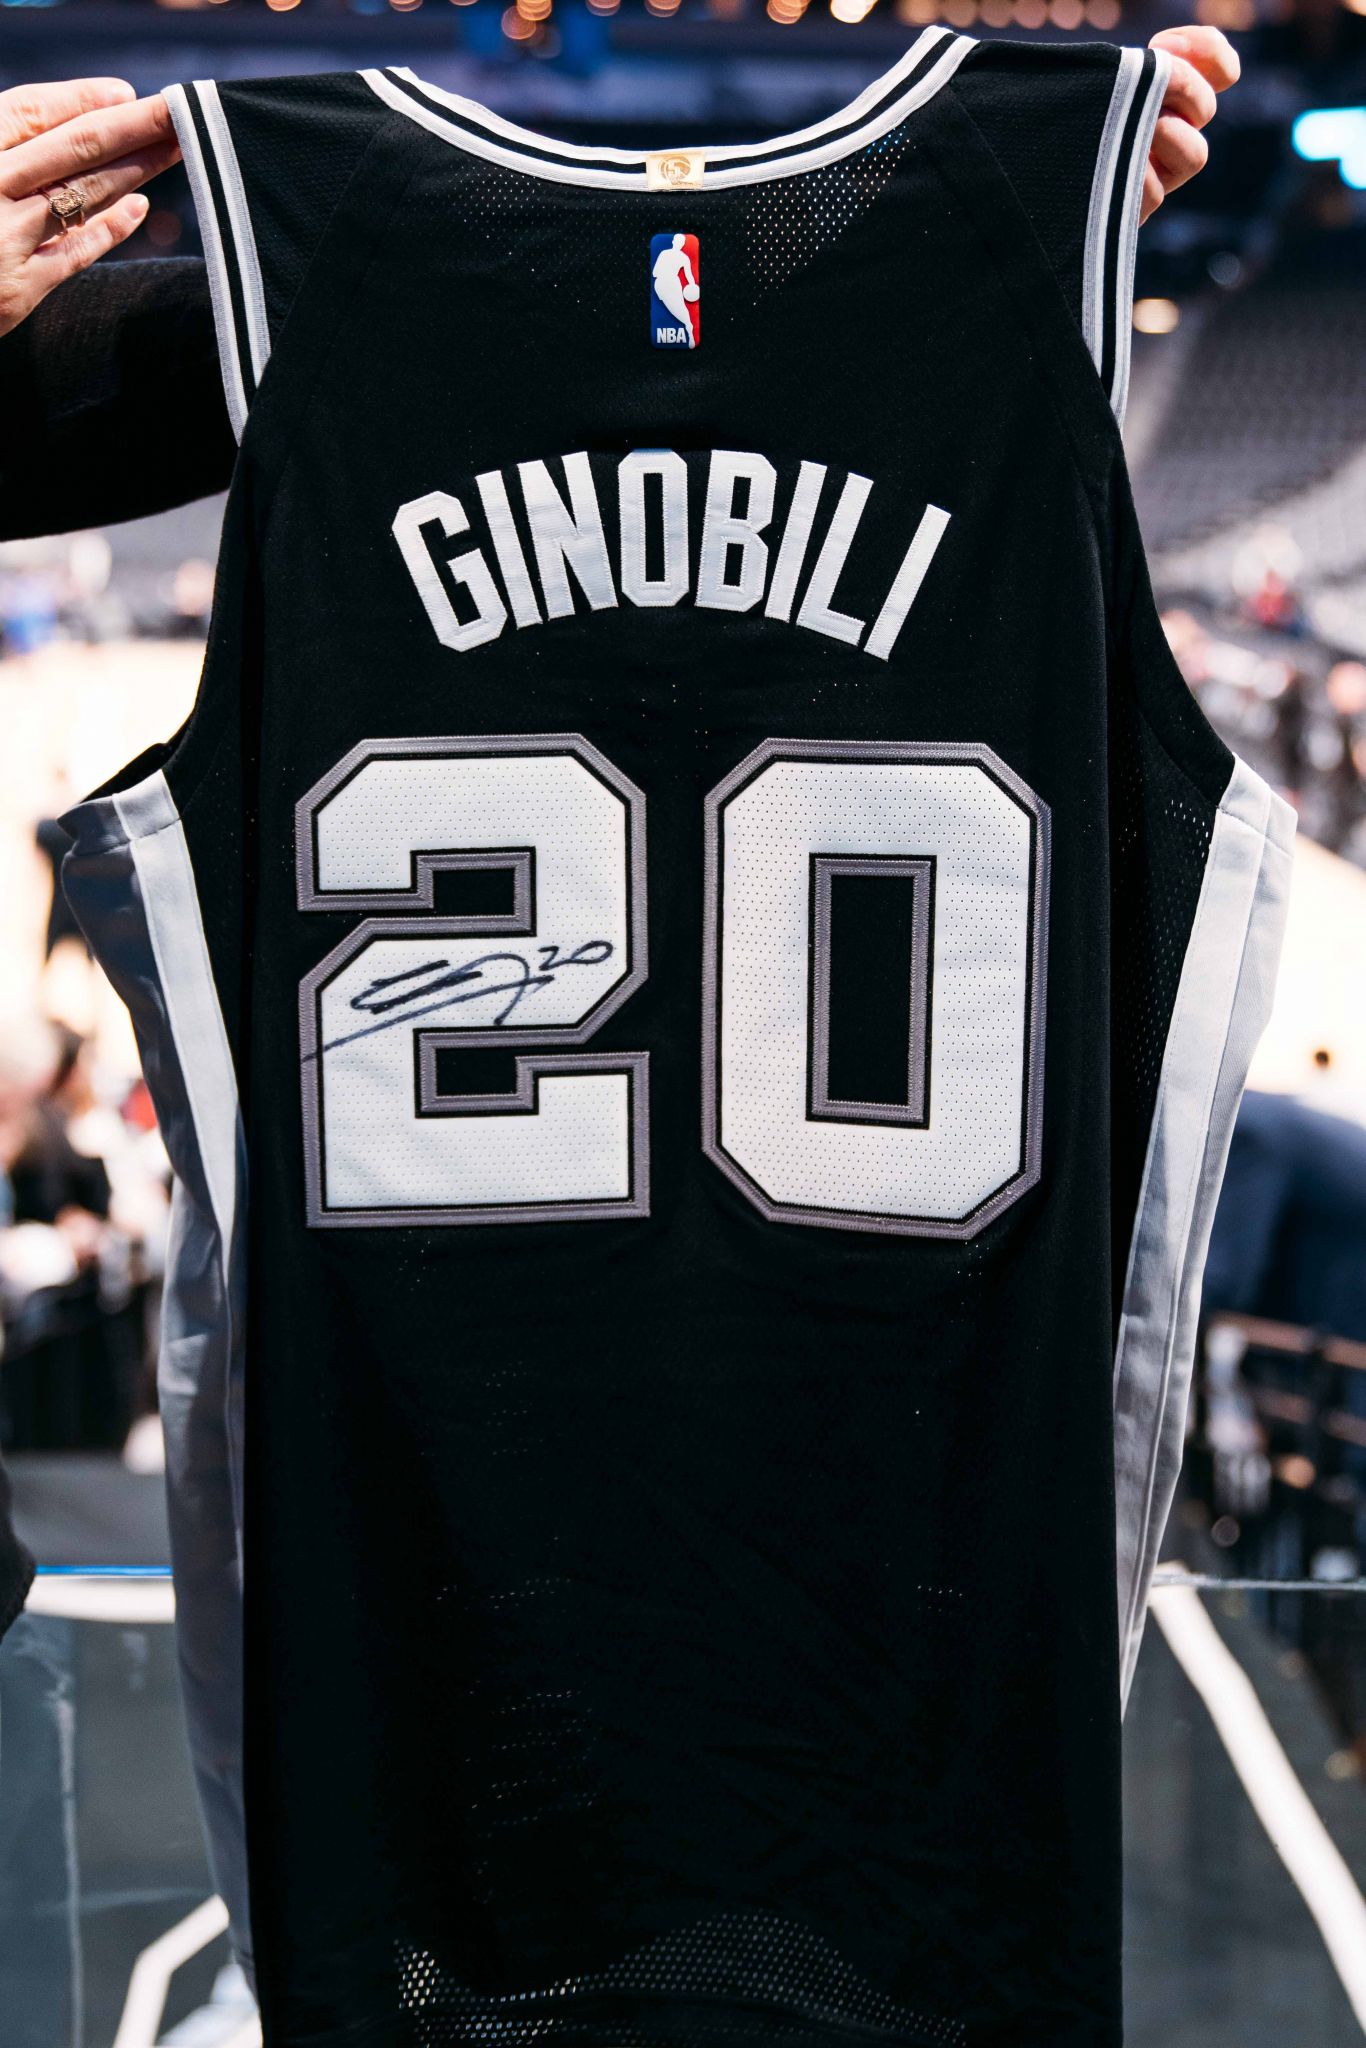 SHARE YOUR MEMORIES: Spurs set to retire Manu's #20 jersey tonight